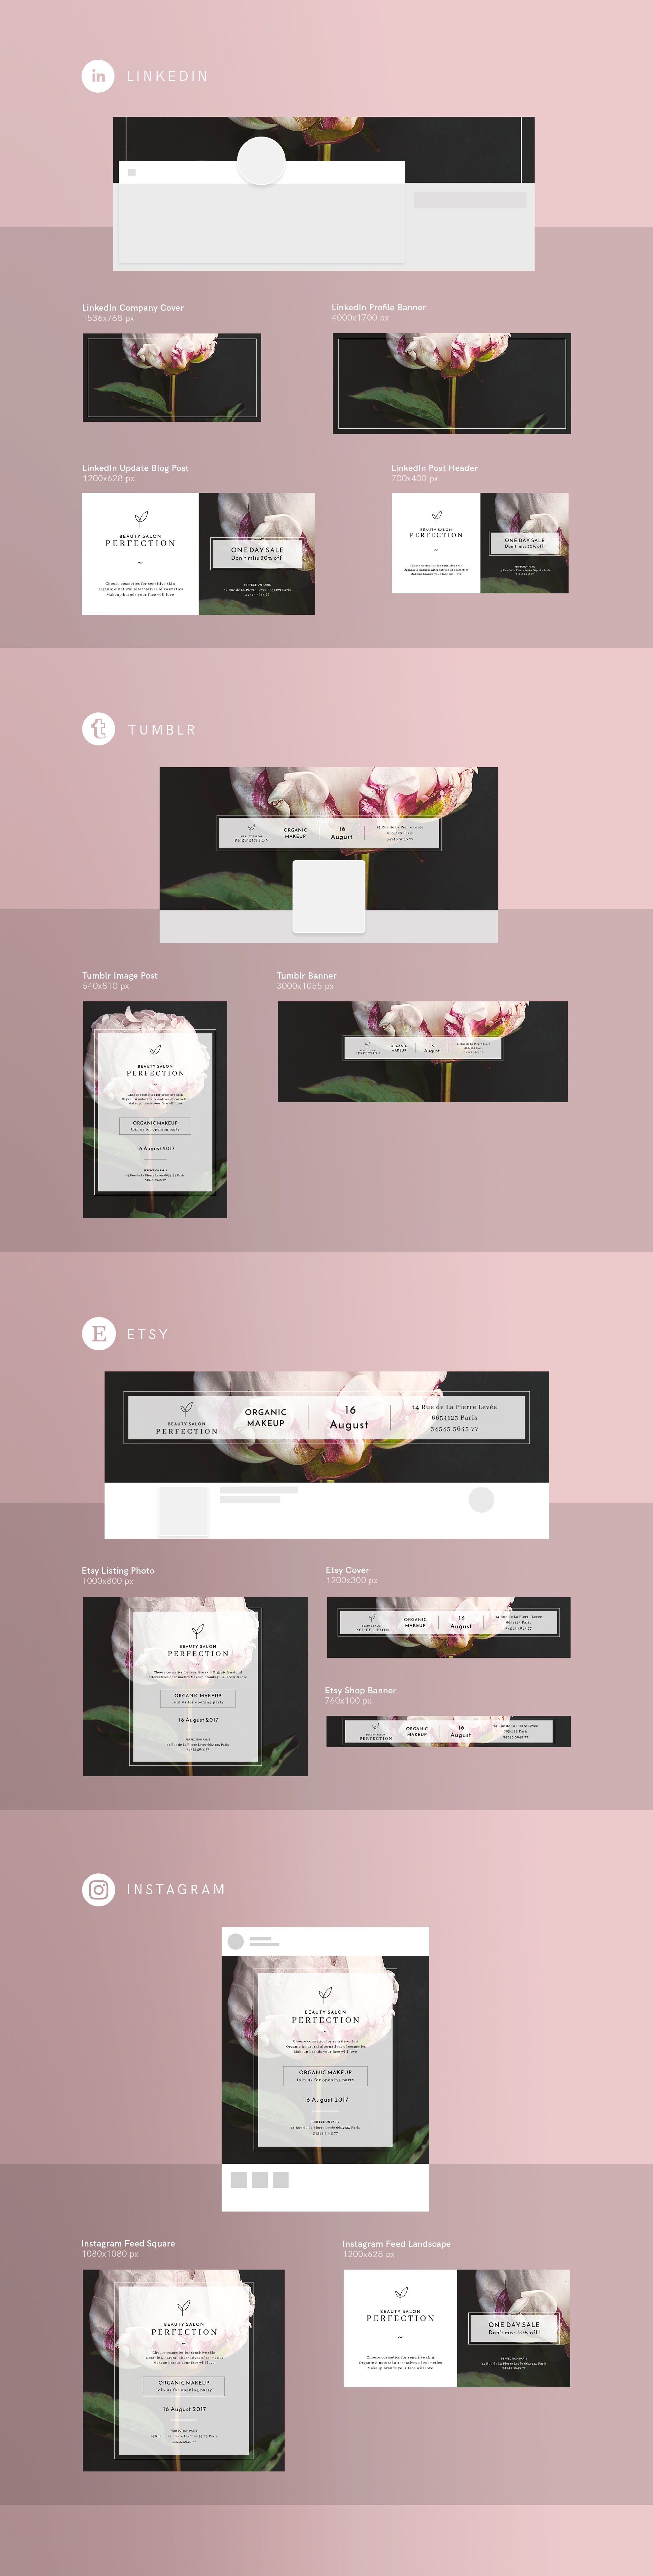 Social Media Pack | Perfection Salon preview image.